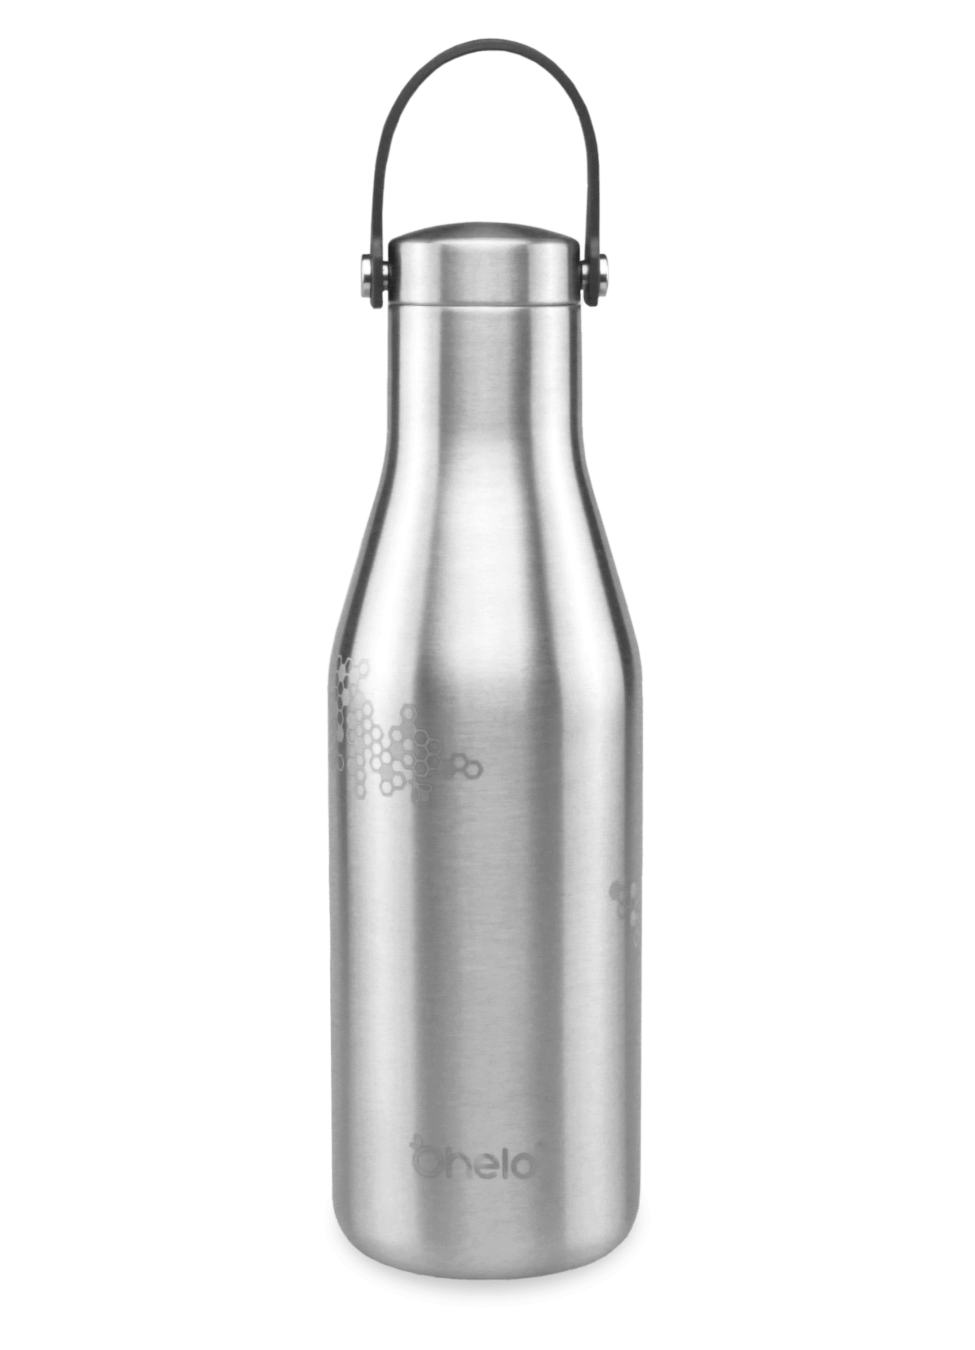 Stainless steel reusable bottle with carry strap and laser etched honeycomb and bee